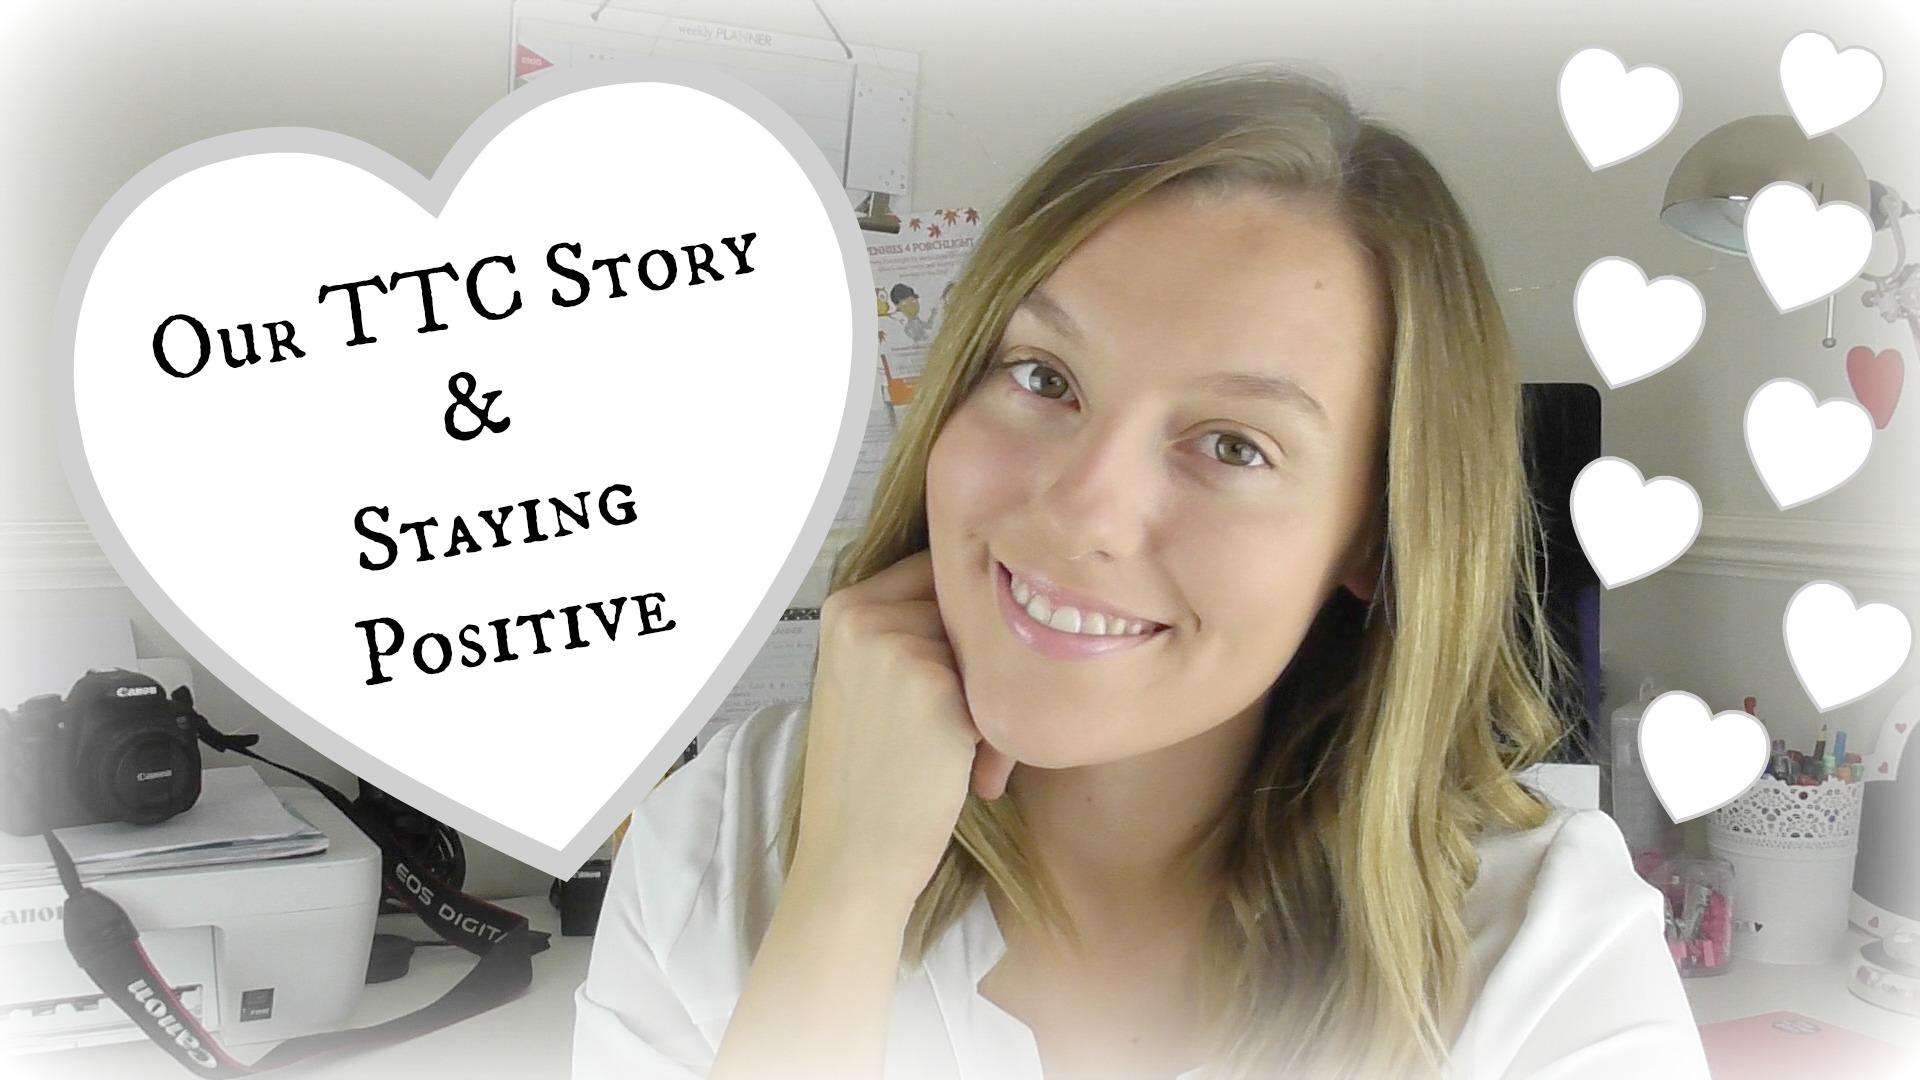 Our TTC Story & Staying Positive